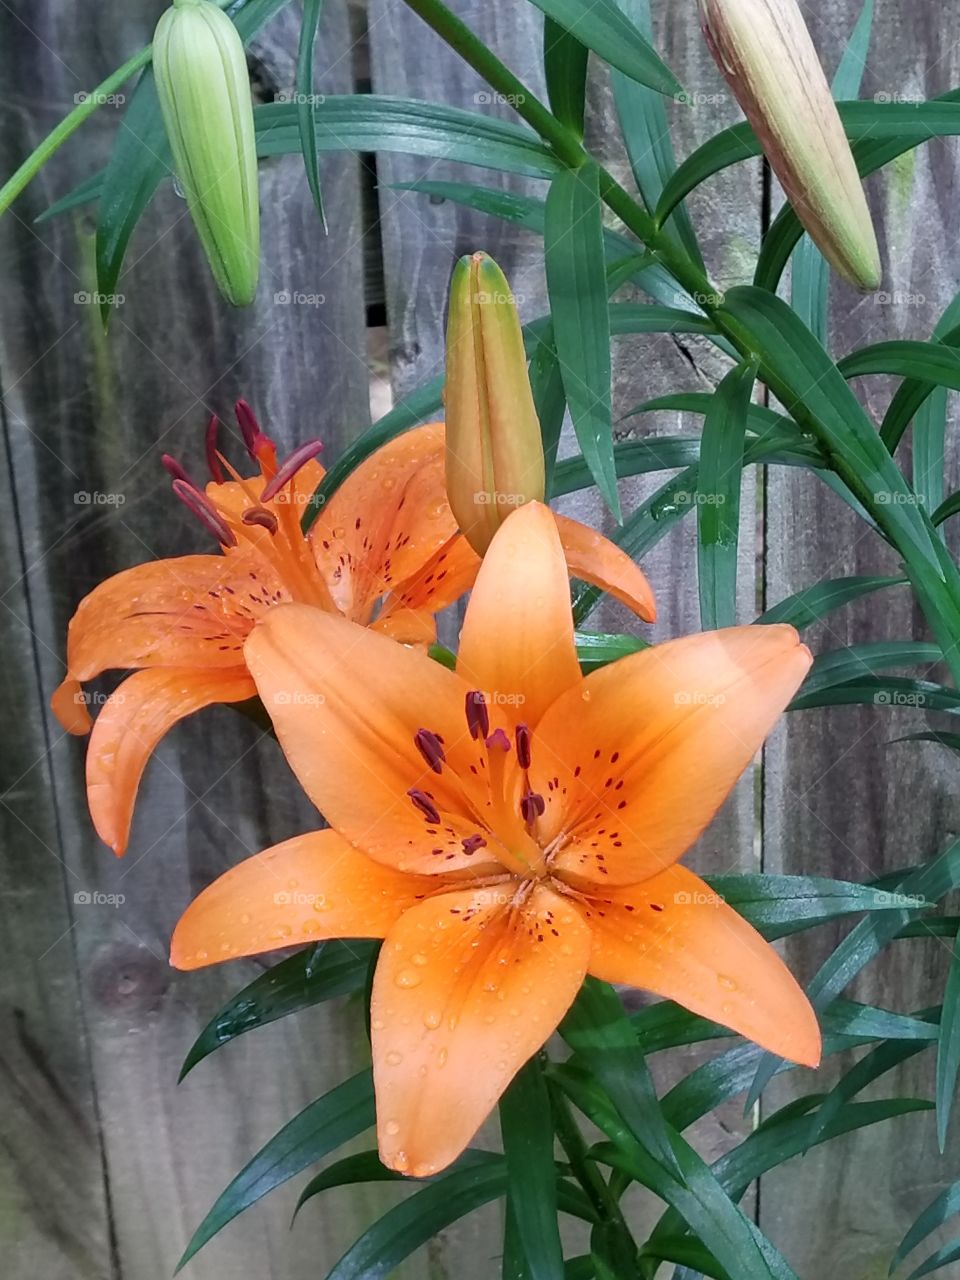 Lilies on wood fence